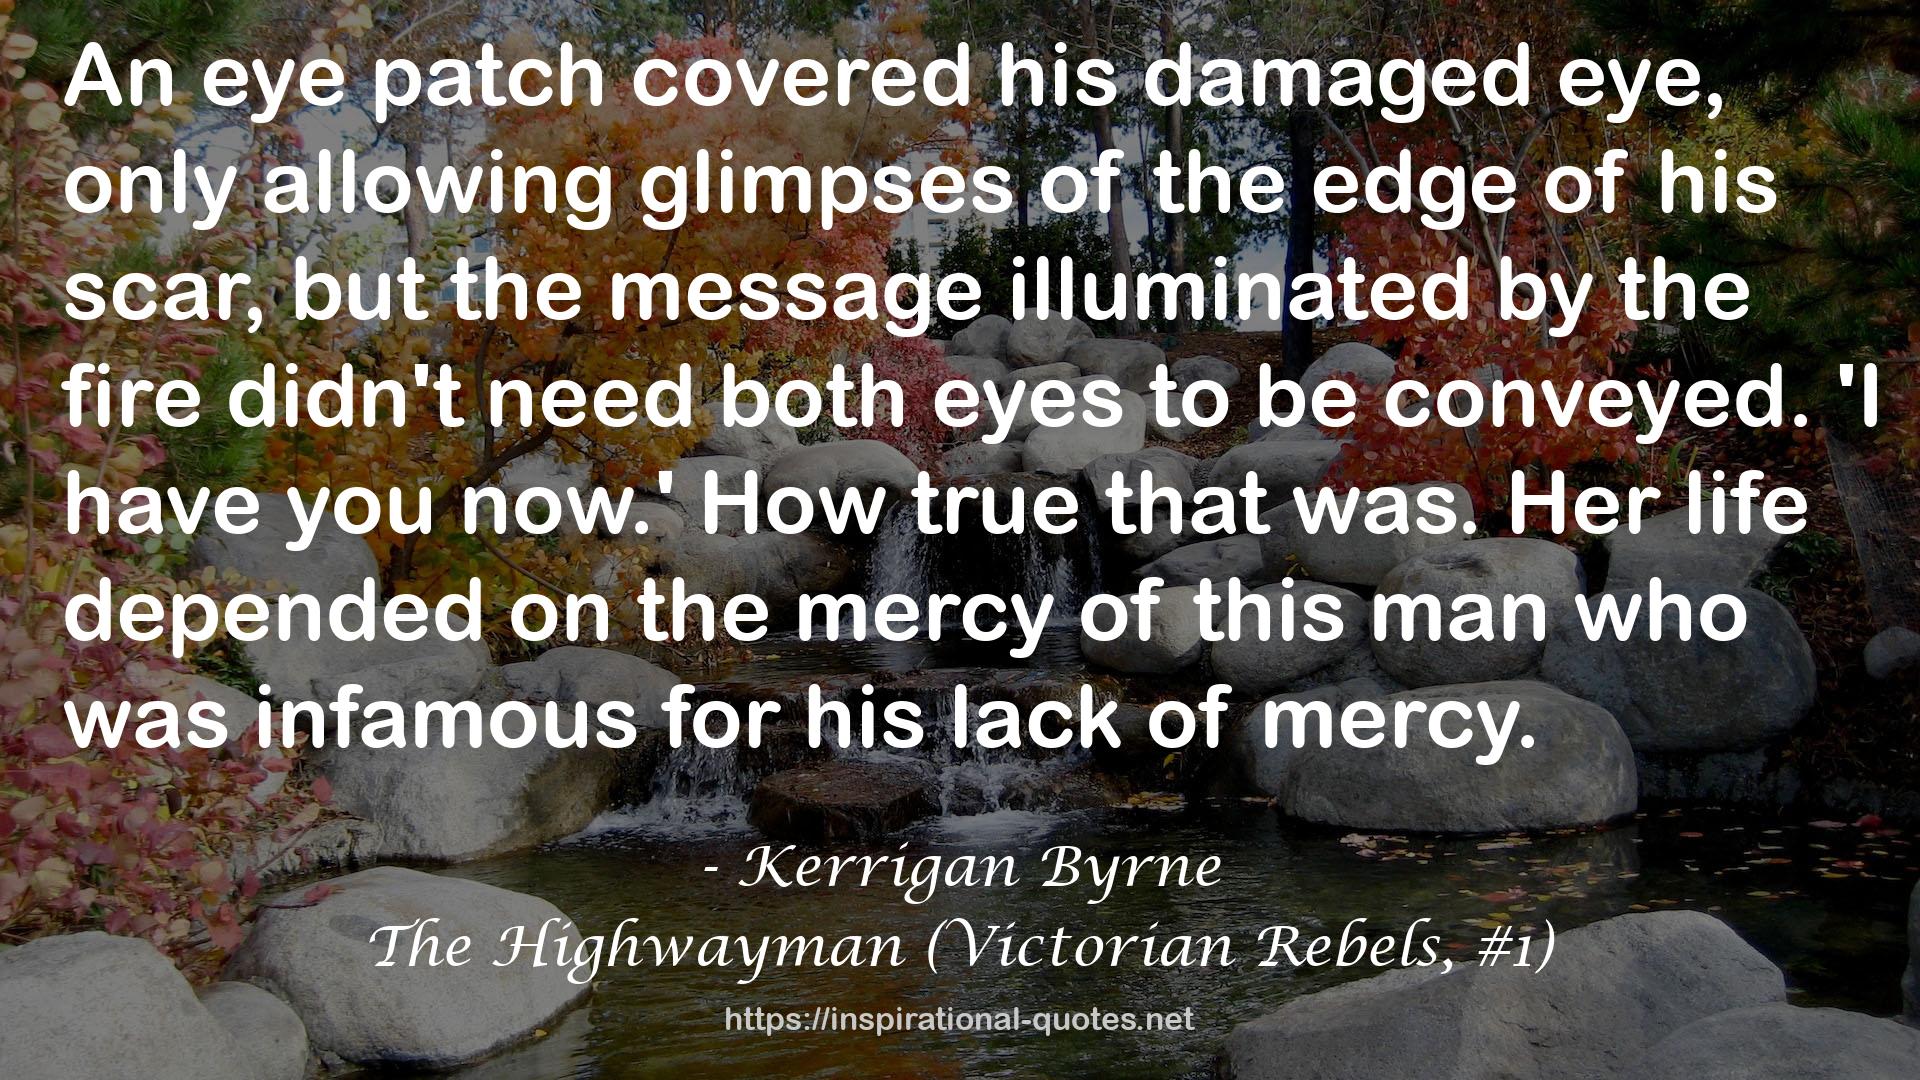 The Highwayman (Victorian Rebels, #1) QUOTES